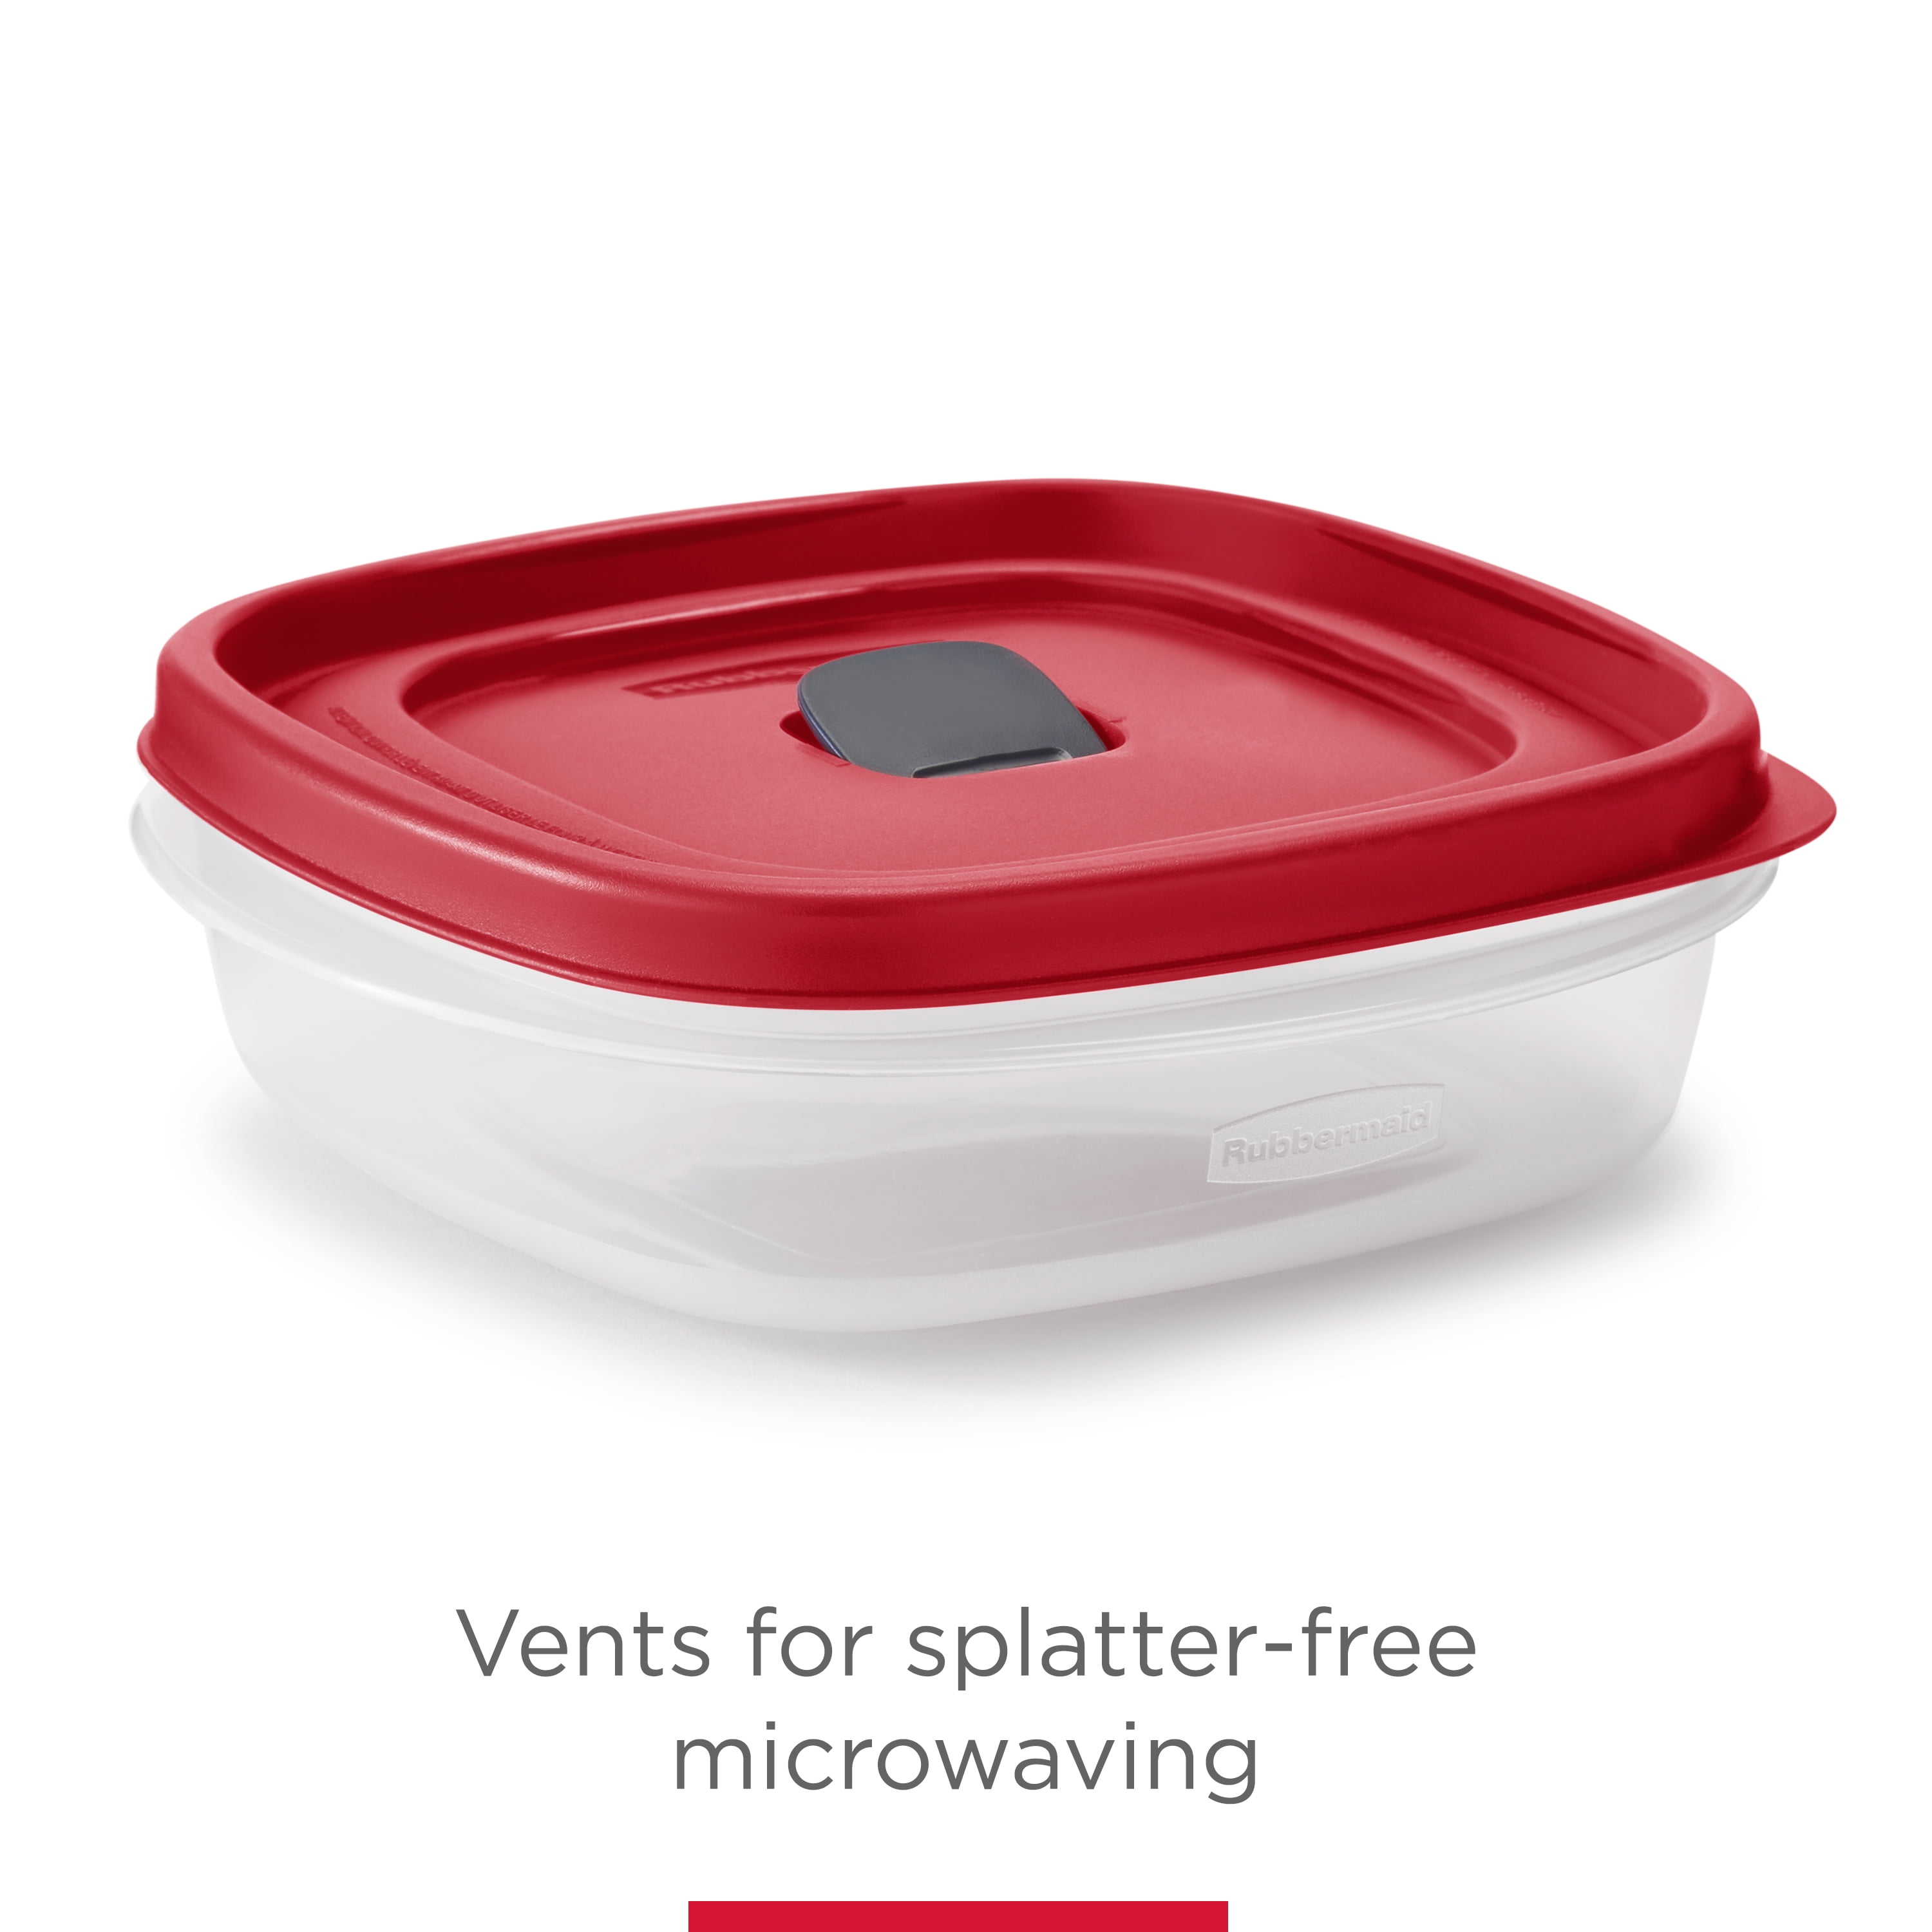 Grab a 40-piece set of Rubbermaid Food Storage Containers today